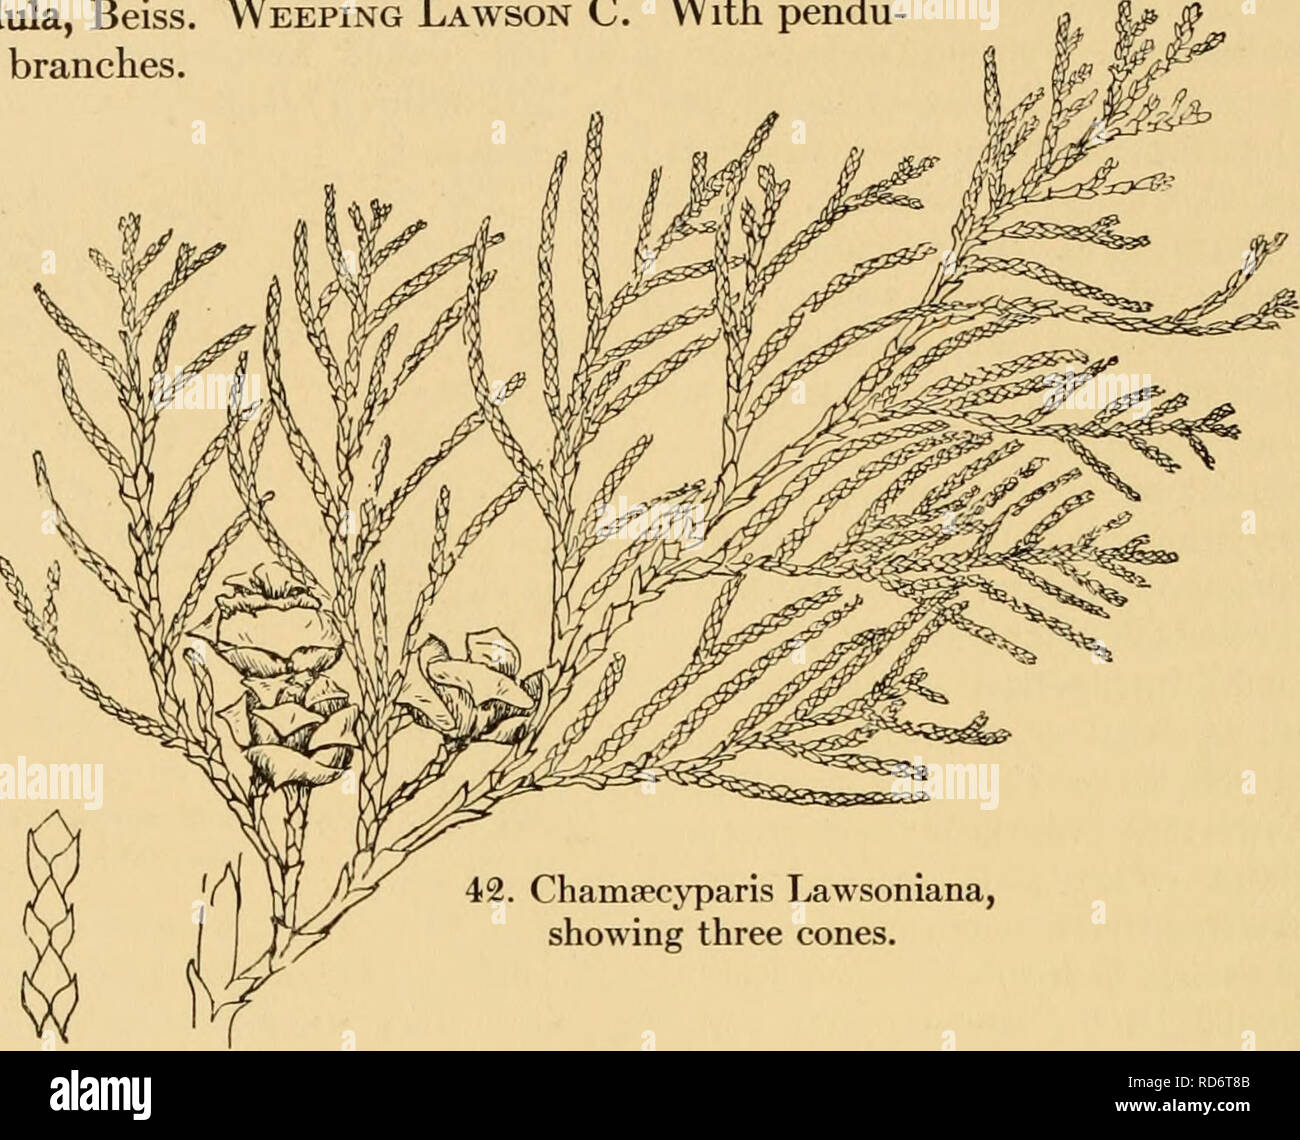 . The cultivated evergreens; a handbook of the coniferous and most important broad-leaved evergreens planted for ornament in the United States and Canada. Evergreens; Conifers. 218 THE CULTIVATED EVERGREENS Forms of spreading and pendulous habit: gracilis, Beiss. (var. gracilis pendula, Hort.). Fountain Lawson C. Elegant light green form, with graceful pendulous branehlets. Var. intertexta, Beiss. Glaucous growth, with remote pendulous branches and distant thickish branehlets. Var. pendula, Beiss. Weeping Lawson C. With pendu- lous branches.. 42. Chamsecyparis Lawsoniana, showing three cones.  Stock Photo